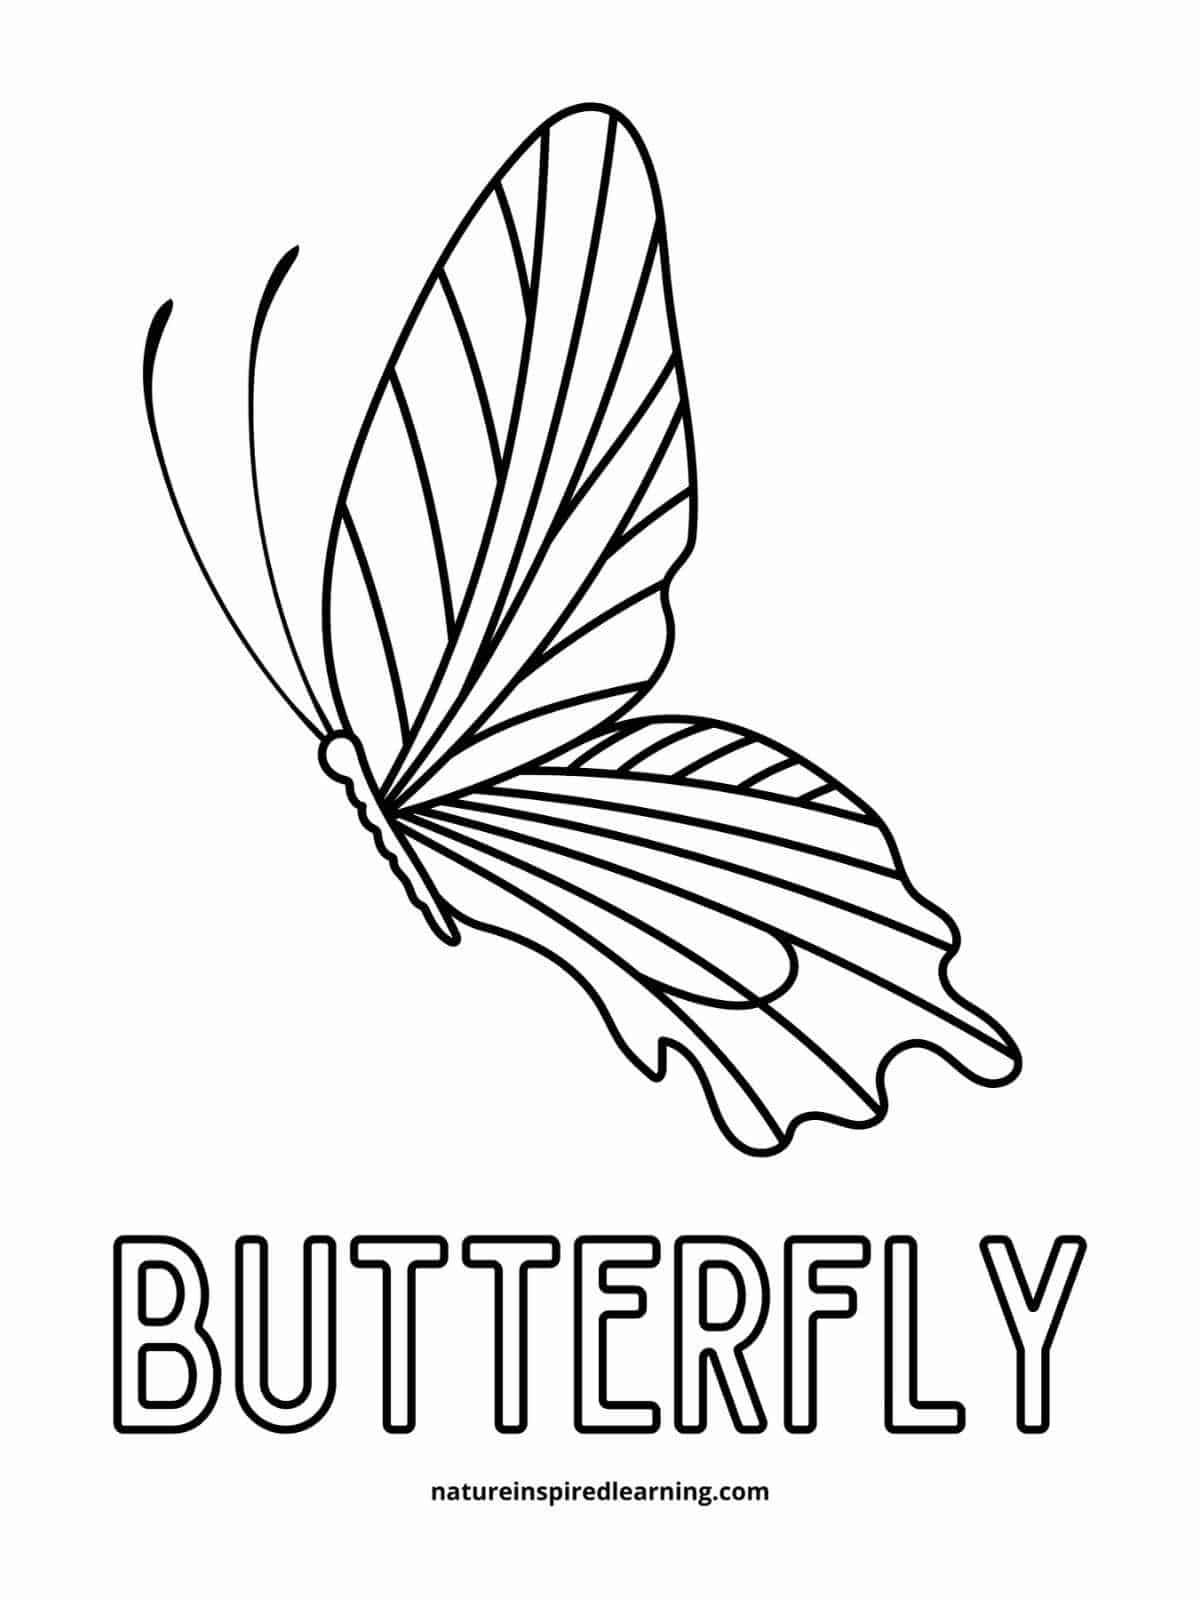 half of a butterfly flying with two large wings above the word butterfly written in all caps outline form